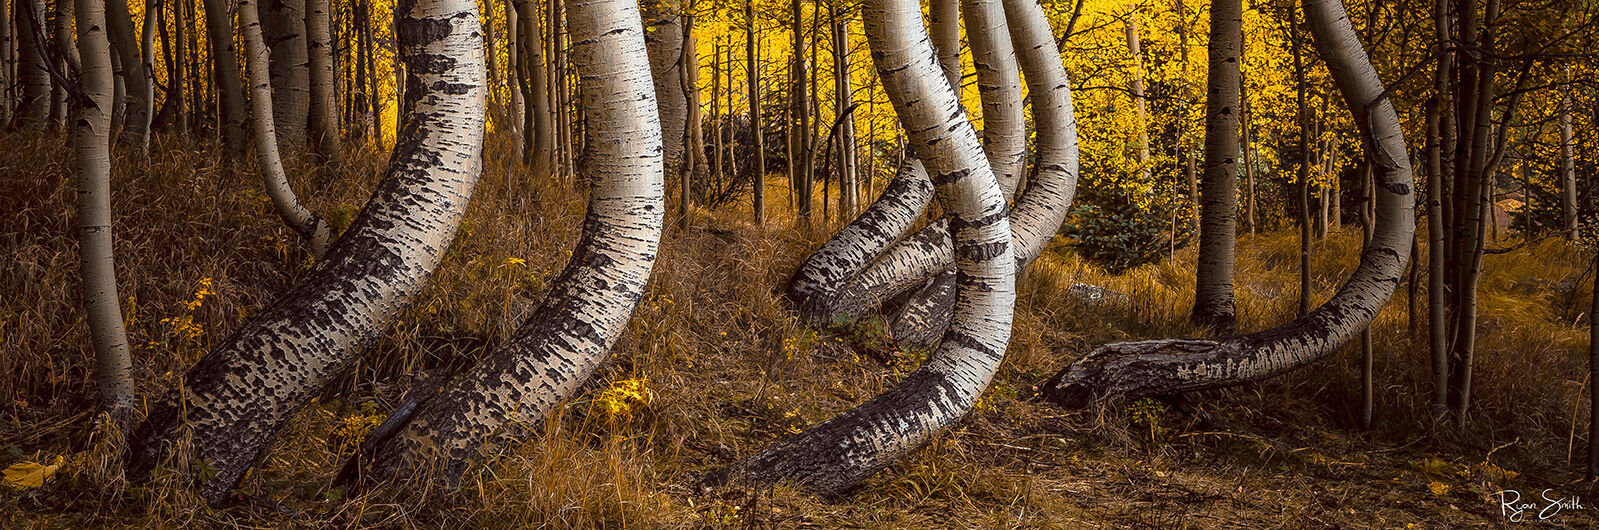 "S" shaped aspen tree trunks are shown with a background of glowing yellow leaves on the other side of the grove in an ultrawide panoramic photo.